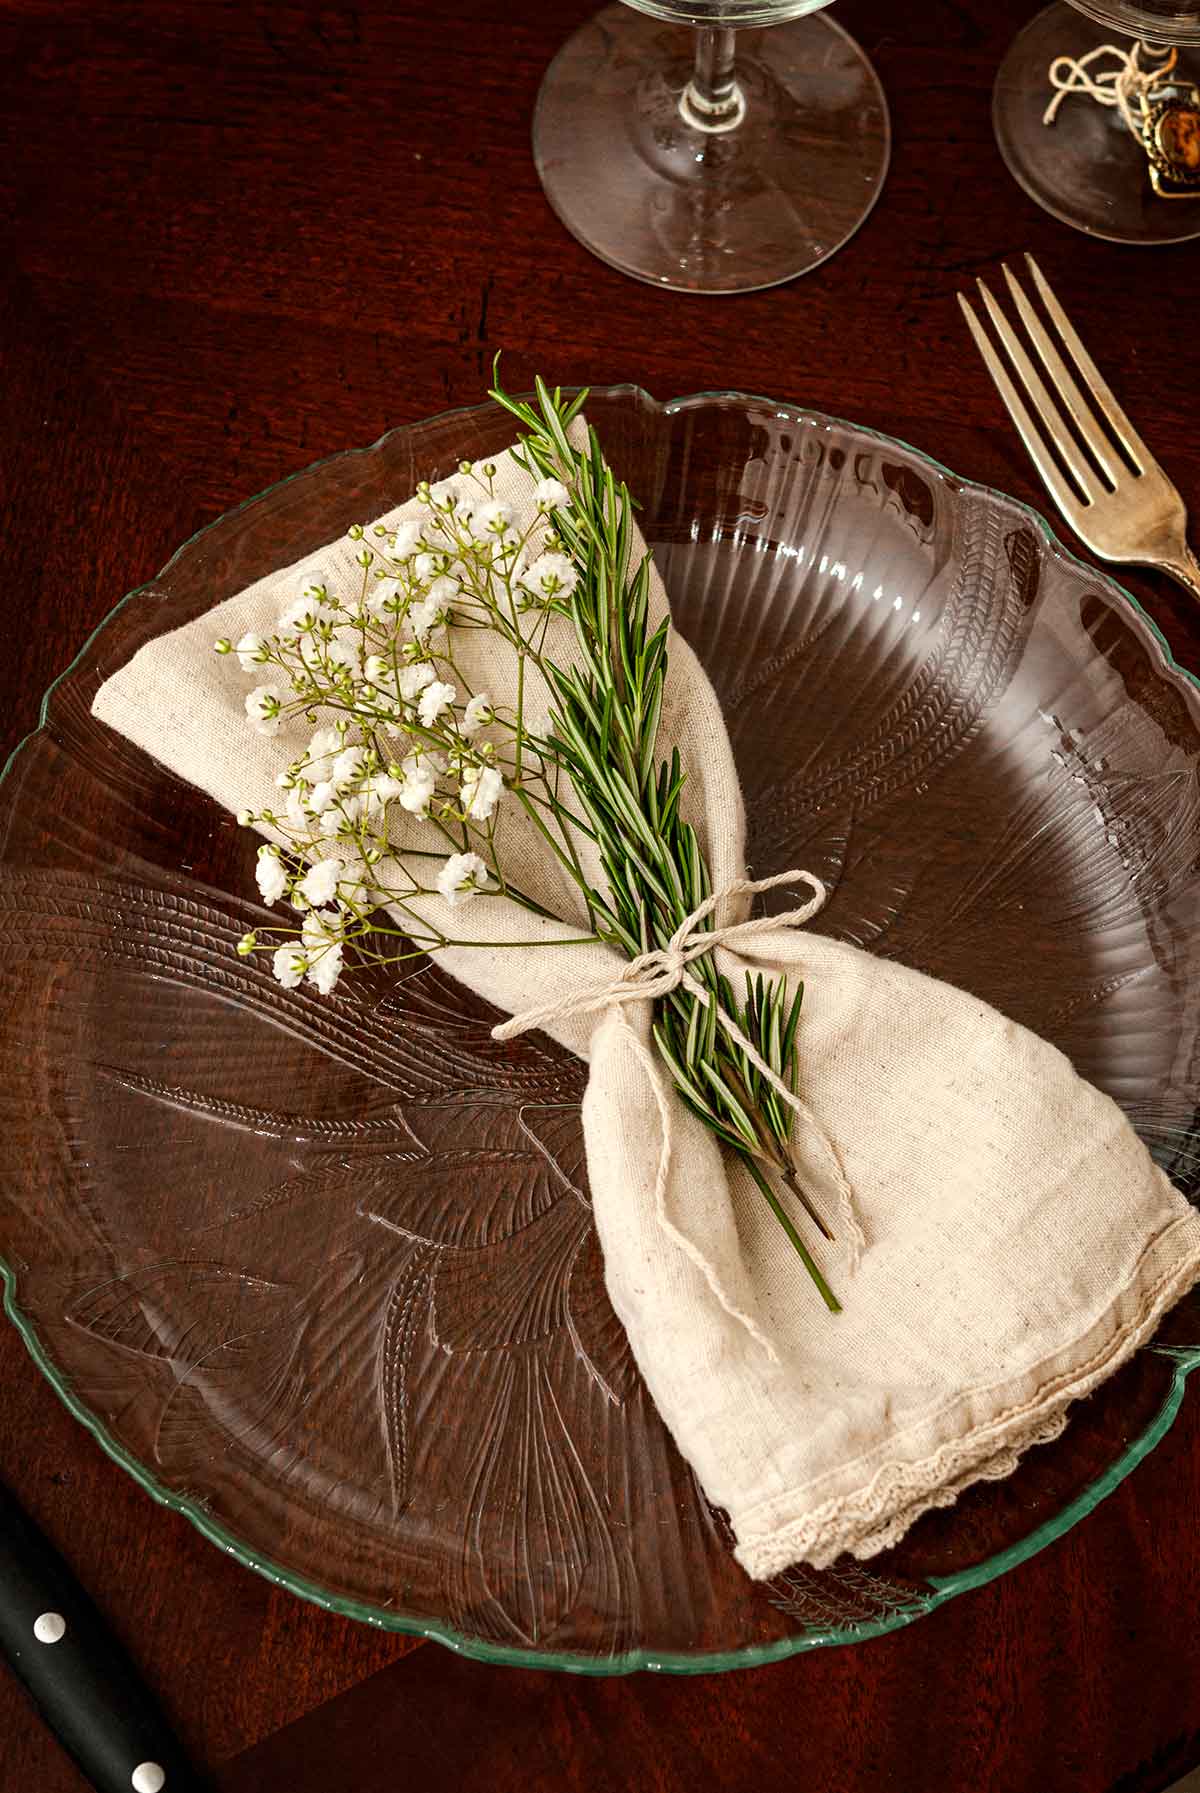 A plate with a napkin with baby's breath and rosemary.